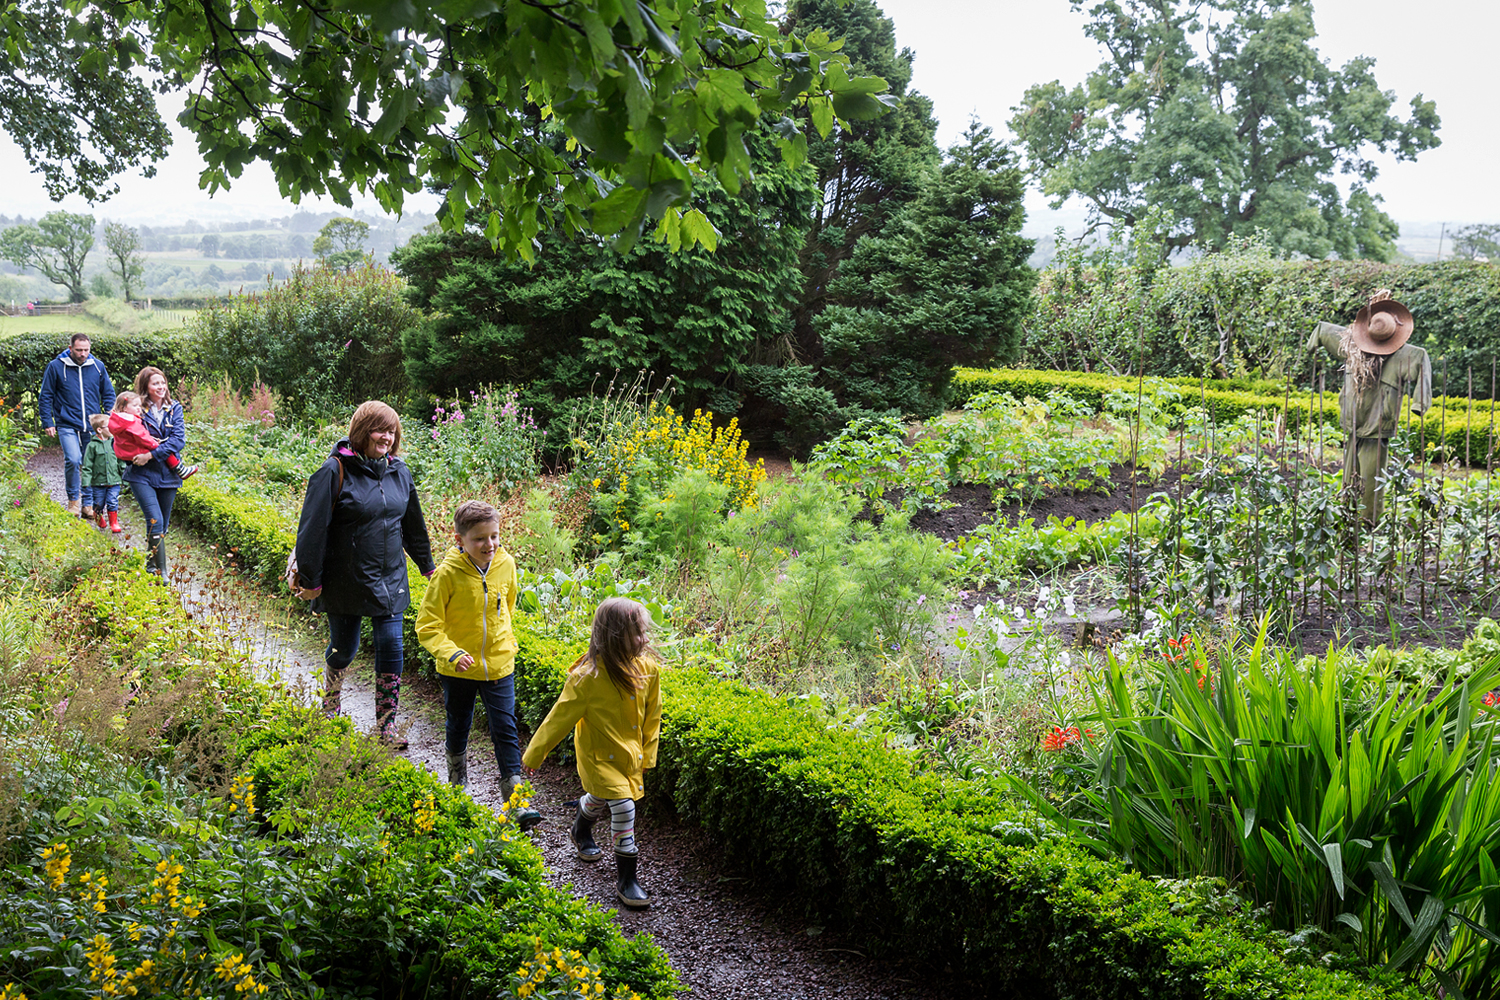 Two families walking along a trail in a garden with a scarecrow.